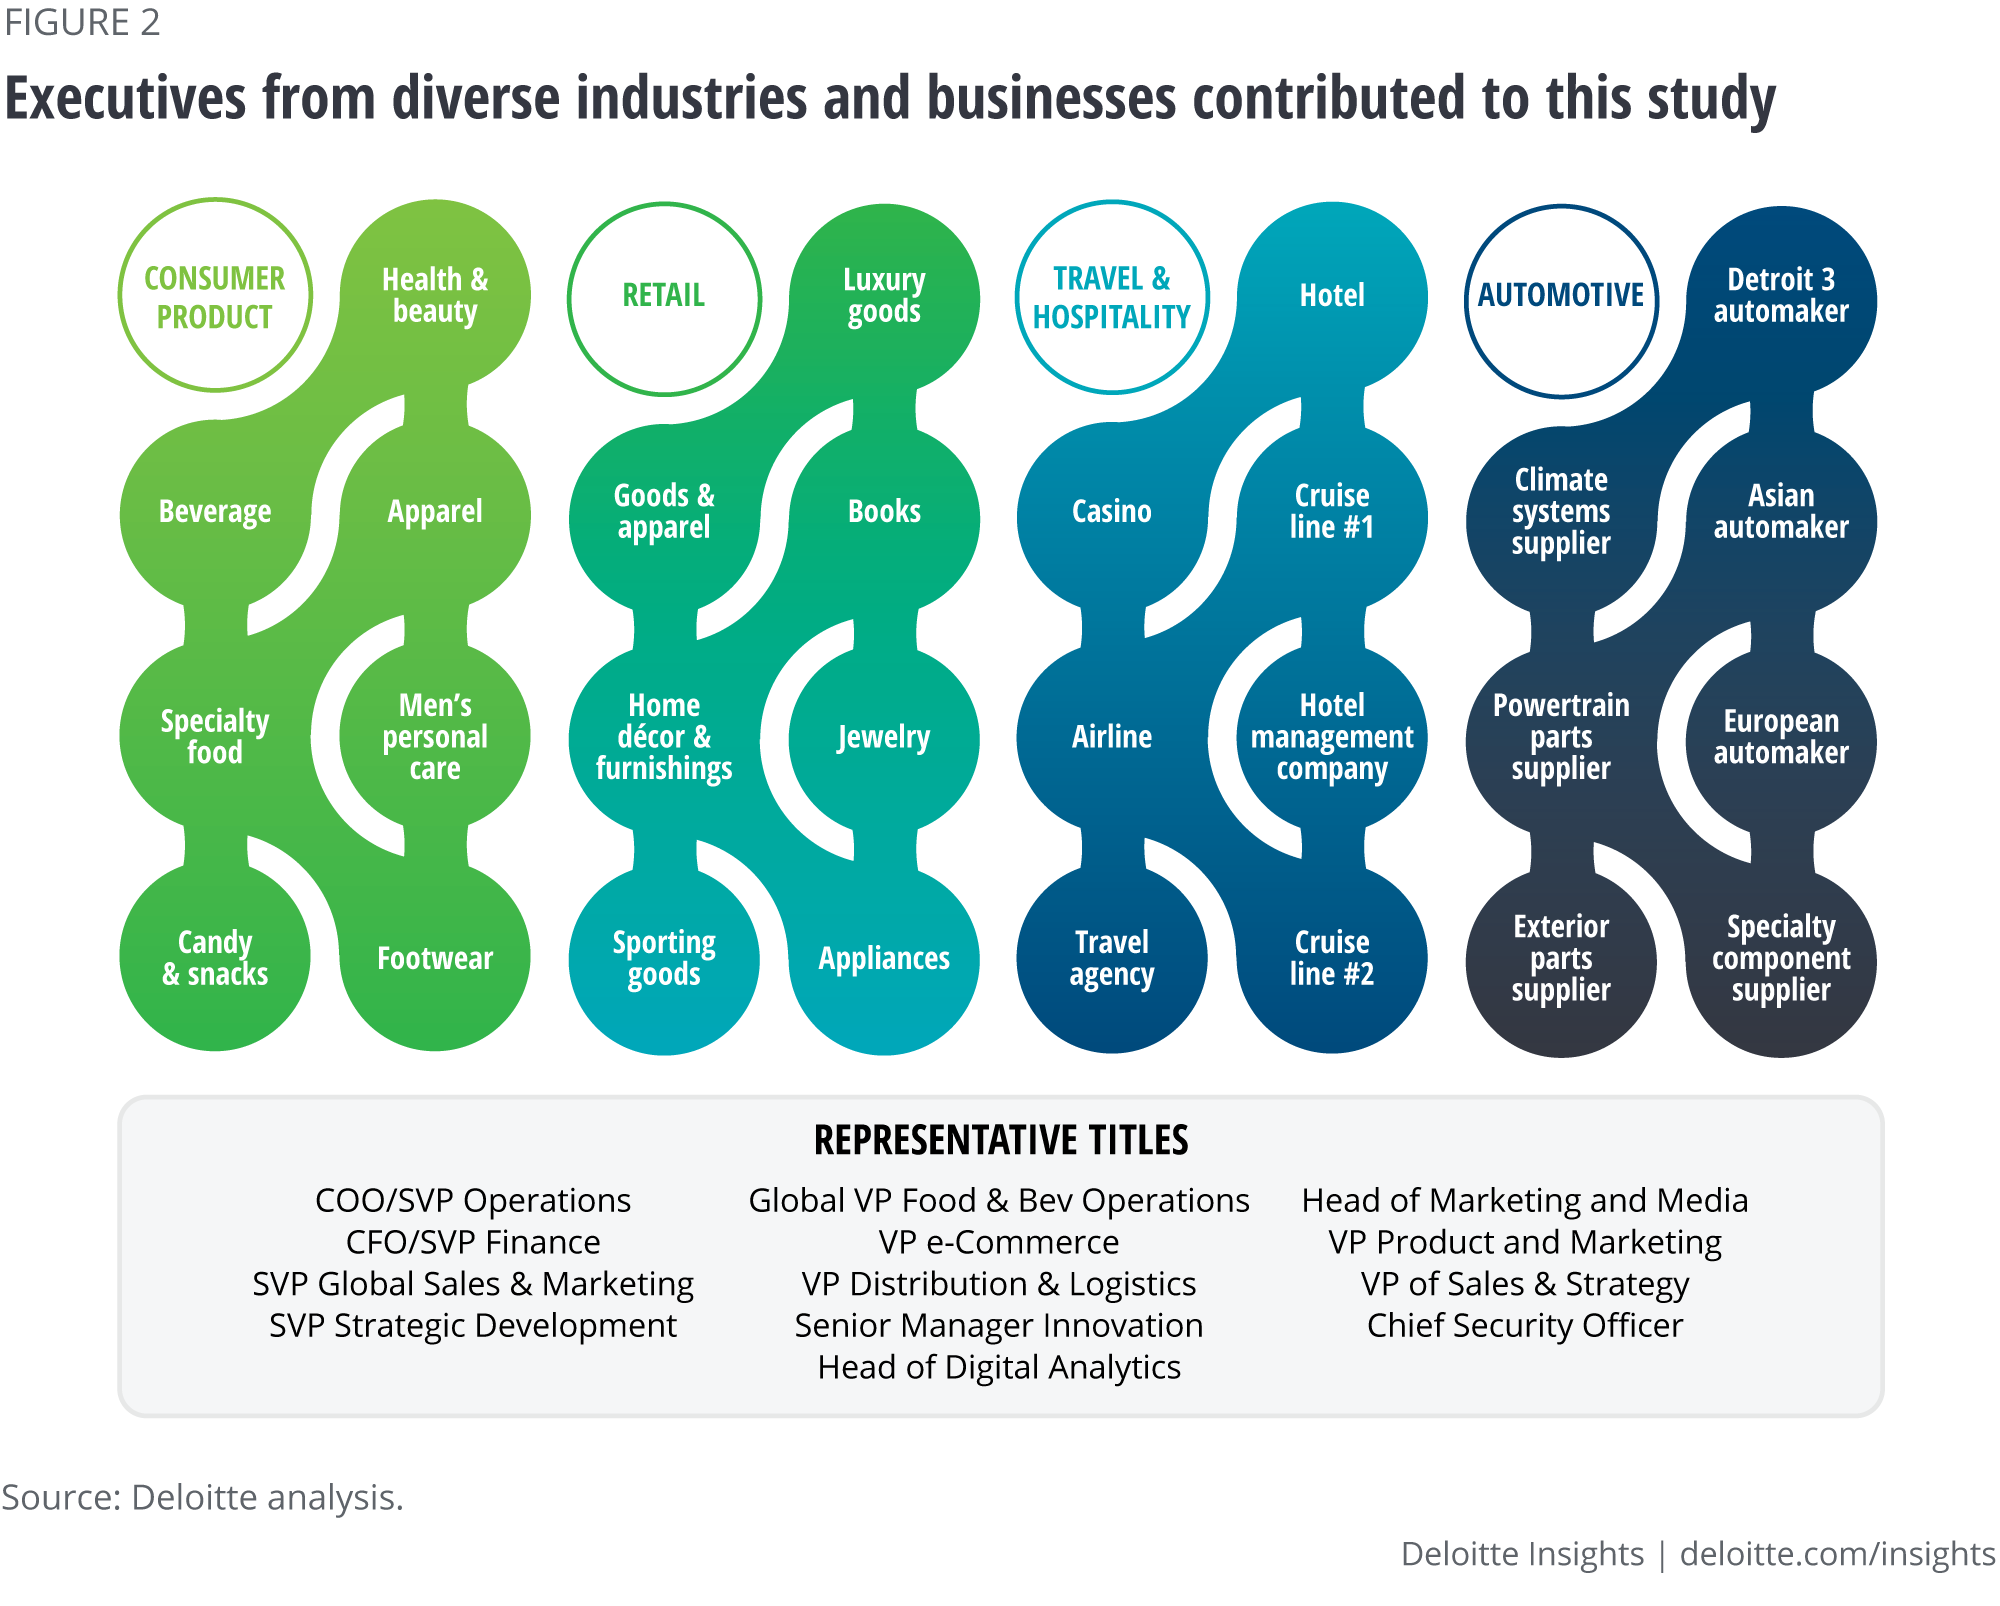 Executives from diverse industries and businesses contributed to this study